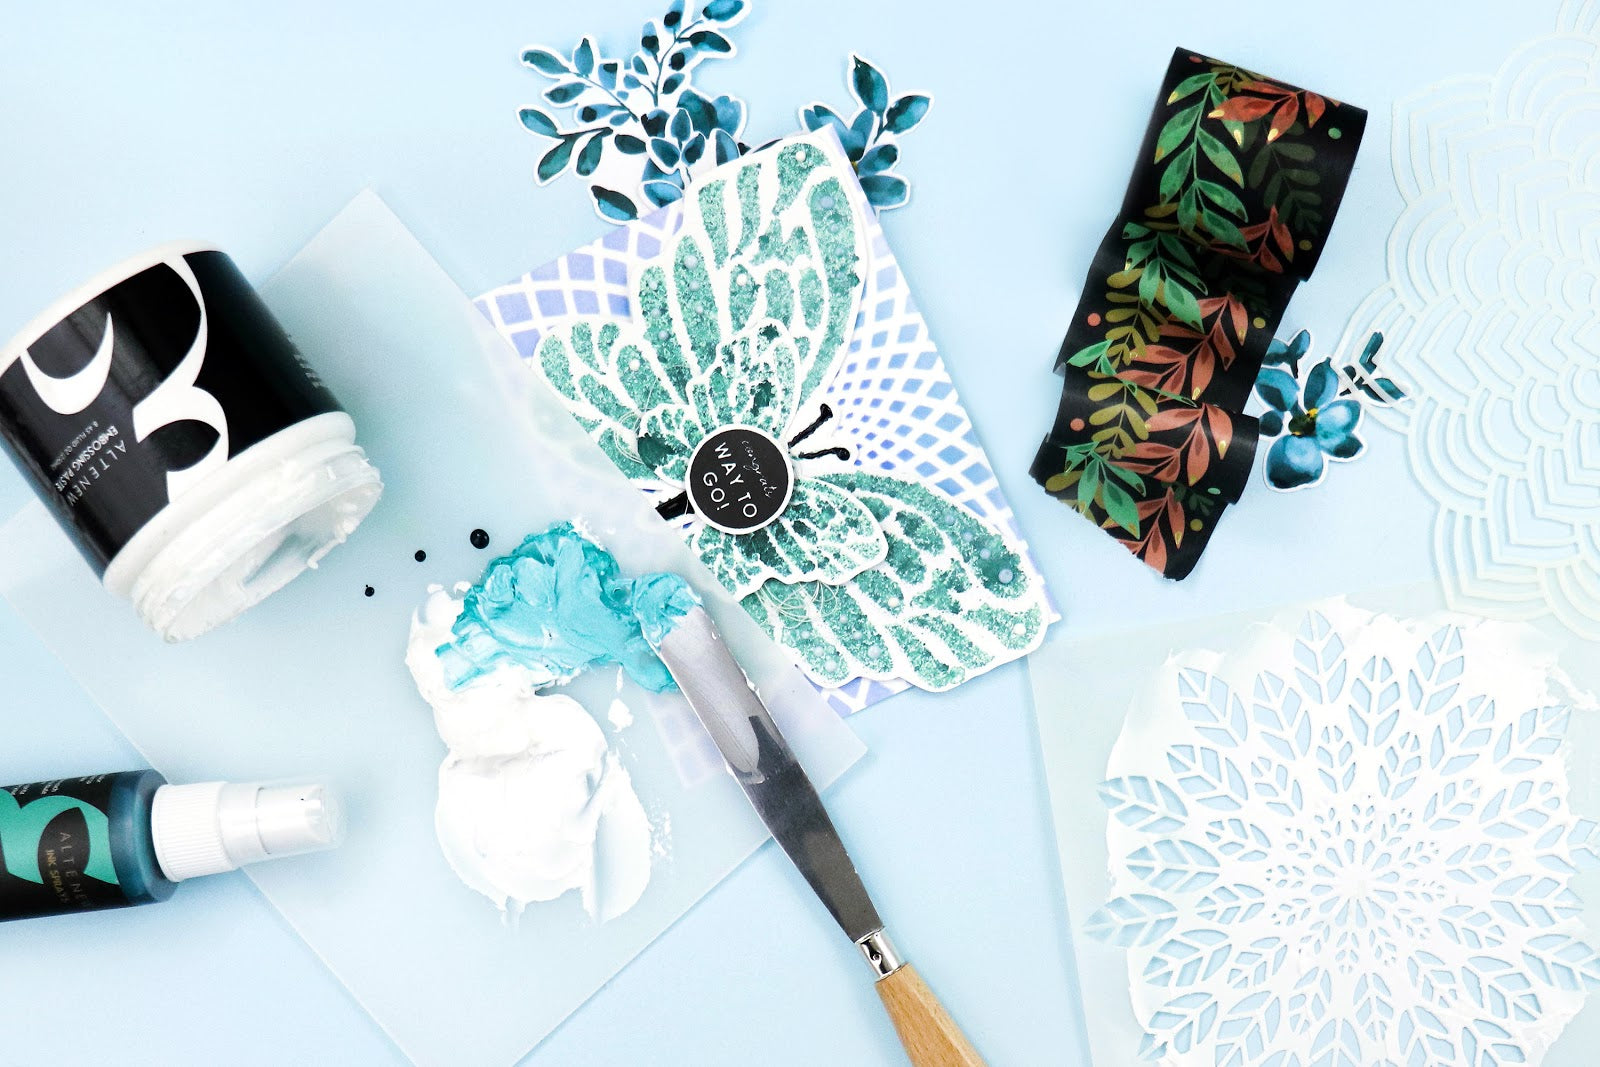 What is Card Making? Everything About This Popular Hobby! – Altenew